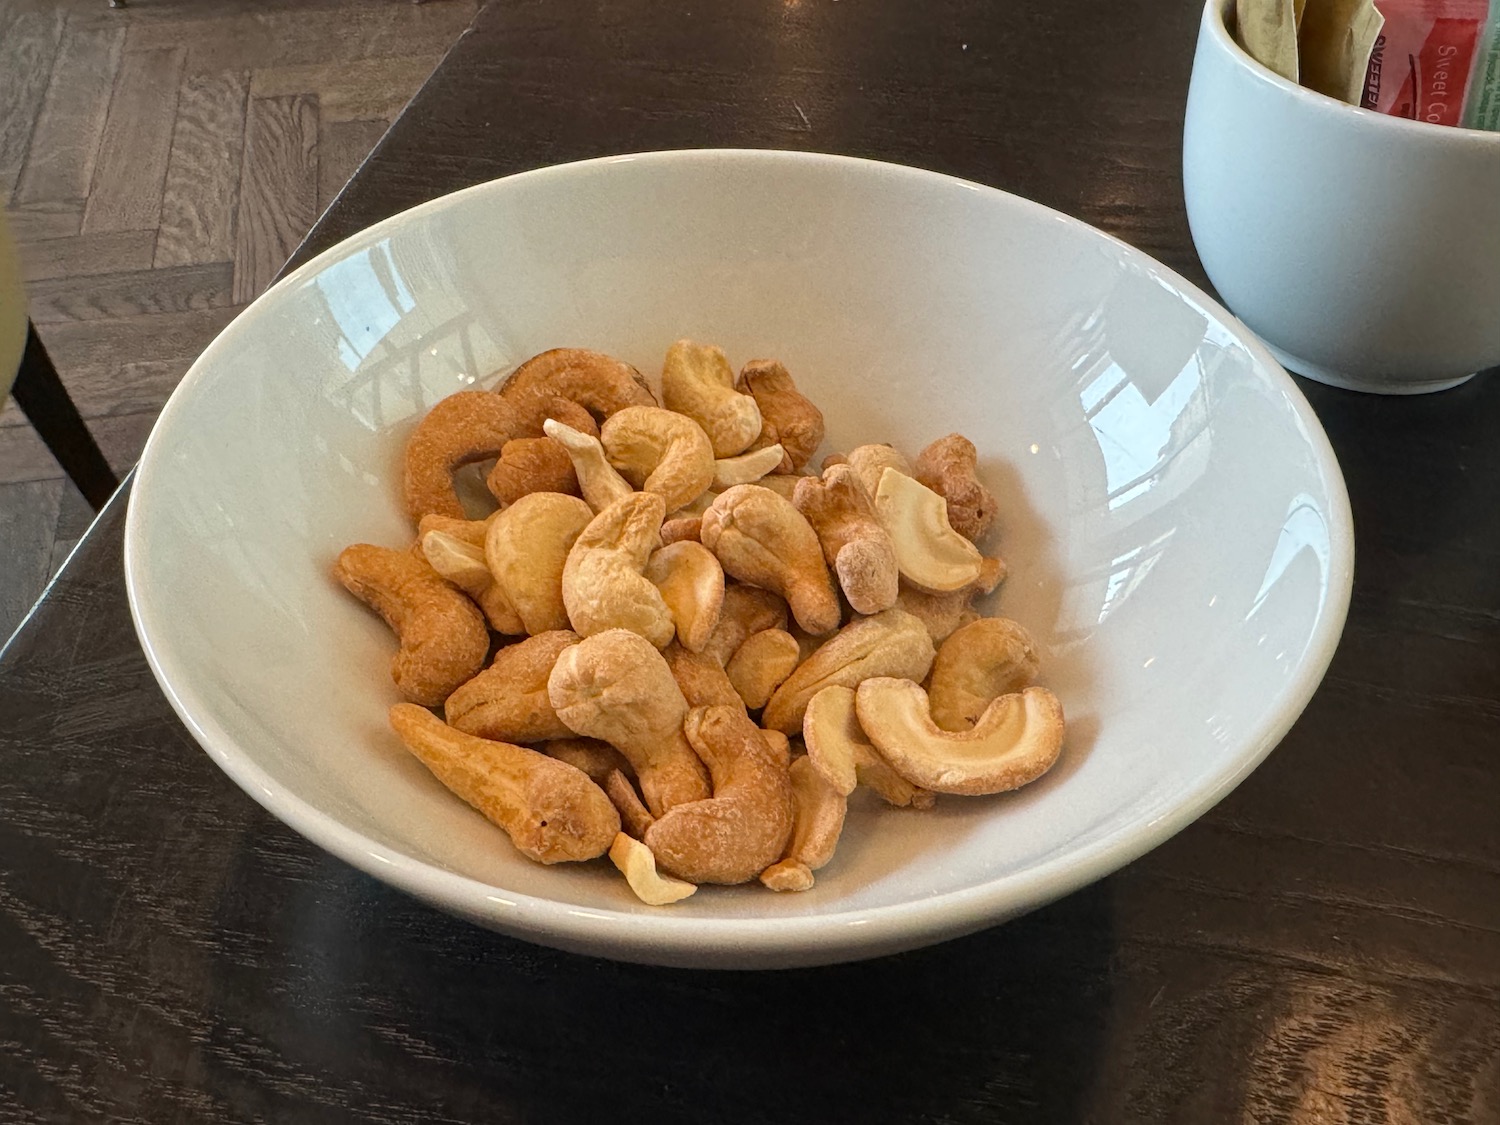 a bowl of cashews and a cup of coffee